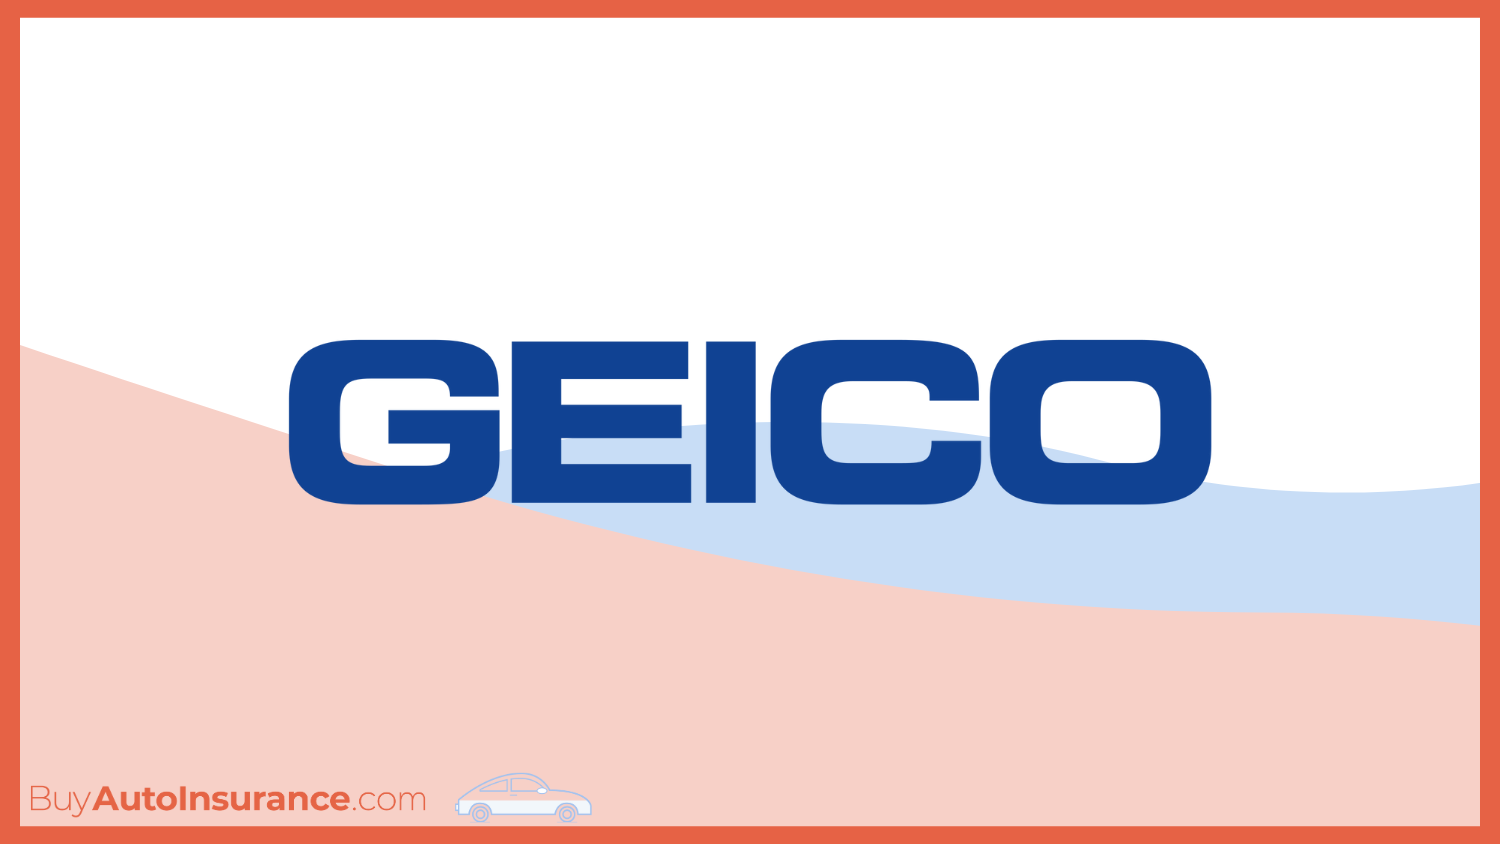 Cheap Auto Insurance Companies That Don't Monitor Your Driving: Geico